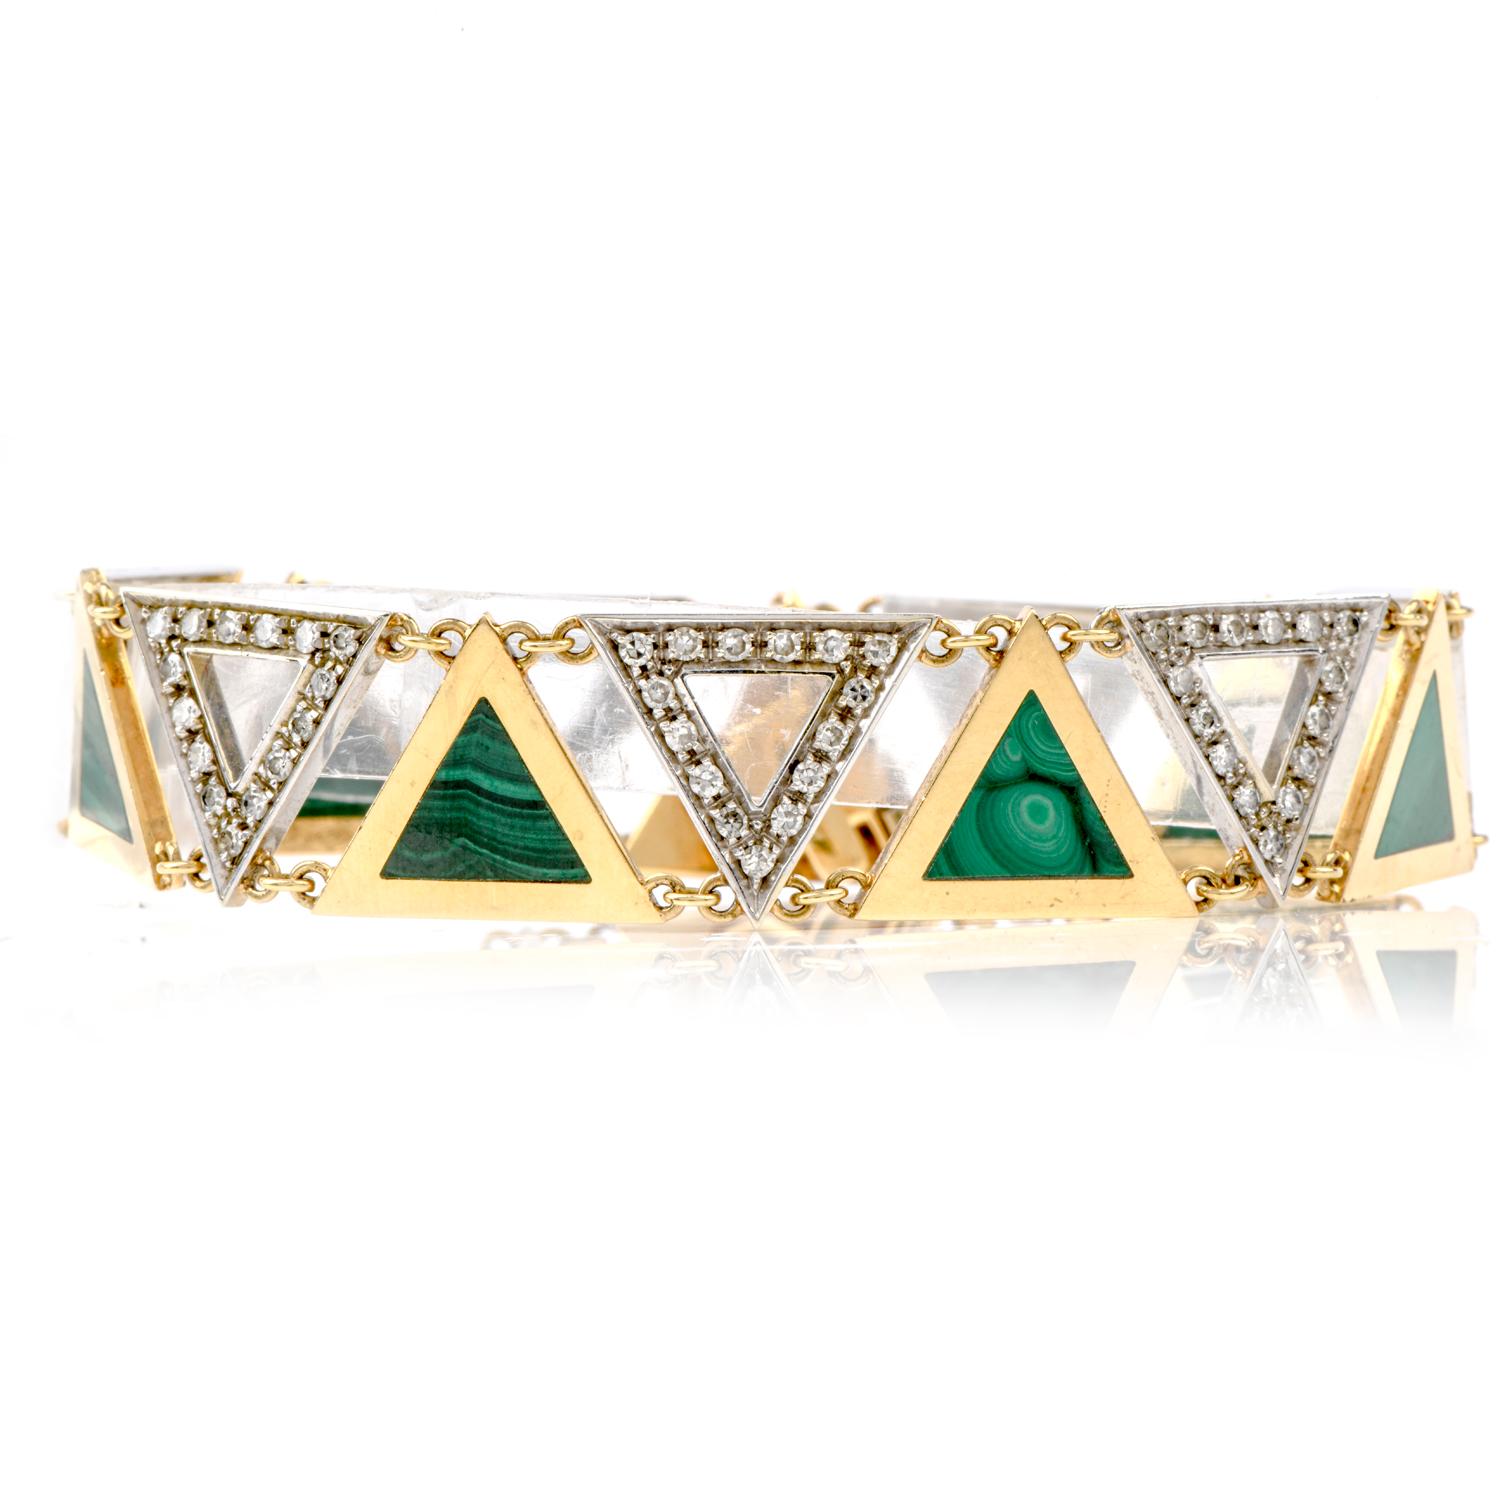 A 17th century Spanish superstition held that if you wear a lozenge of

Malachite, it will help you sleep and keep evil spirits at bay.

 The healing stones of this vintage 1970s bracelet been carefully cut into precise triangles and laid
With